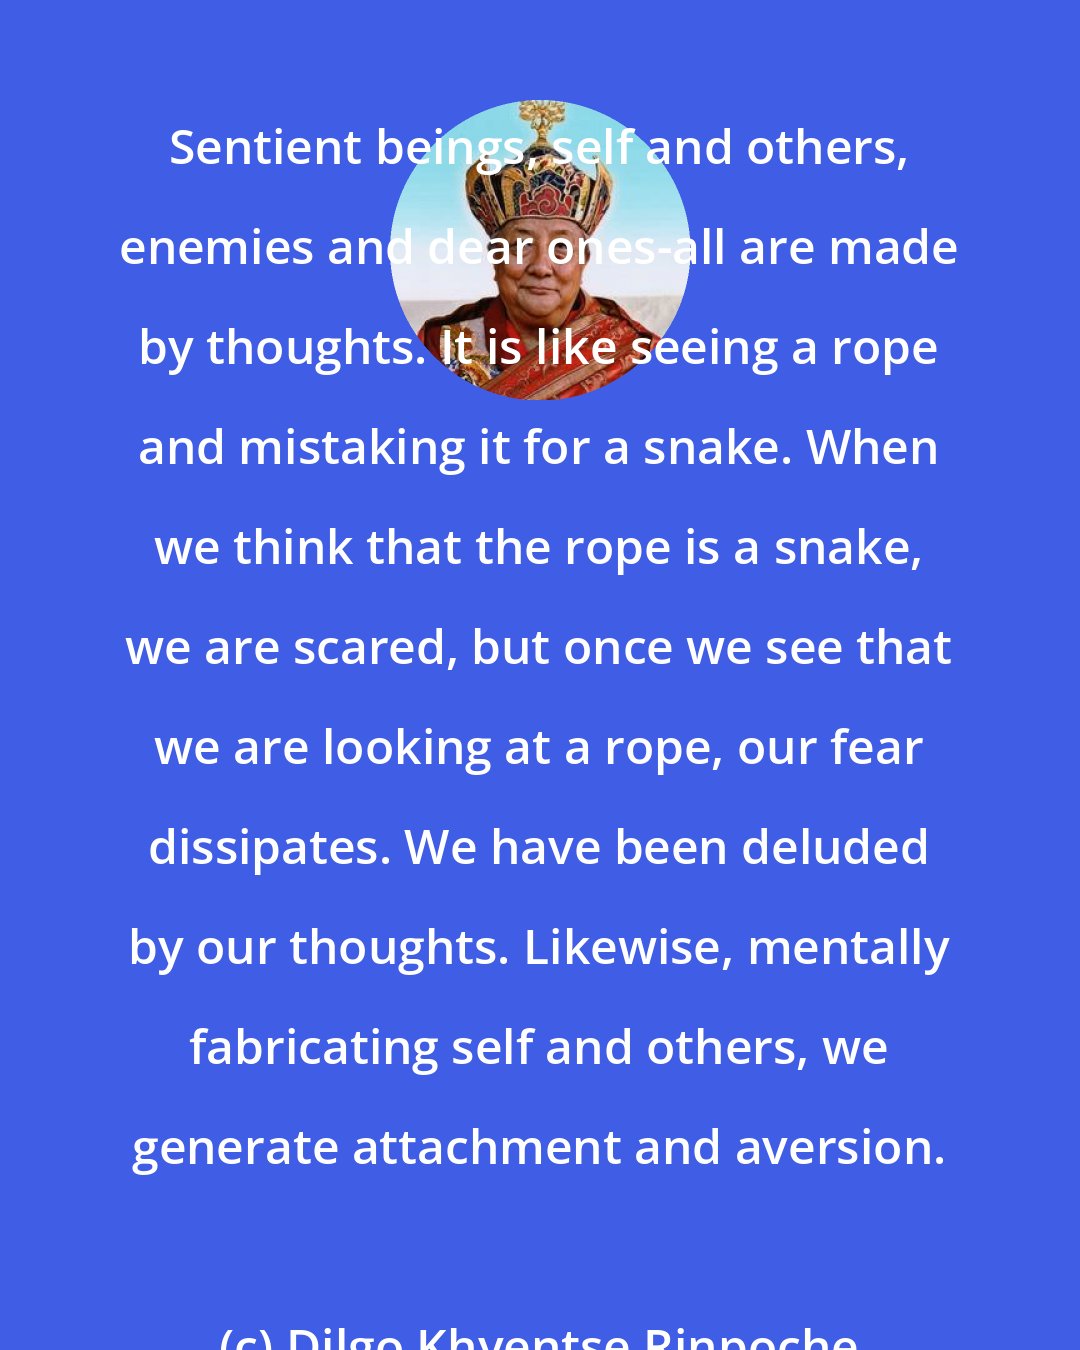 Dilgo Khyentse Rinpoche: Sentient beings, self and others, enemies and dear ones-all are made by thoughts. It is like seeing a rope and mistaking it for a snake. When we think that the rope is a snake, we are scared, but once we see that we are looking at a rope, our fear dissipates. We have been deluded by our thoughts. Likewise, mentally fabricating self and others, we generate attachment and aversion.